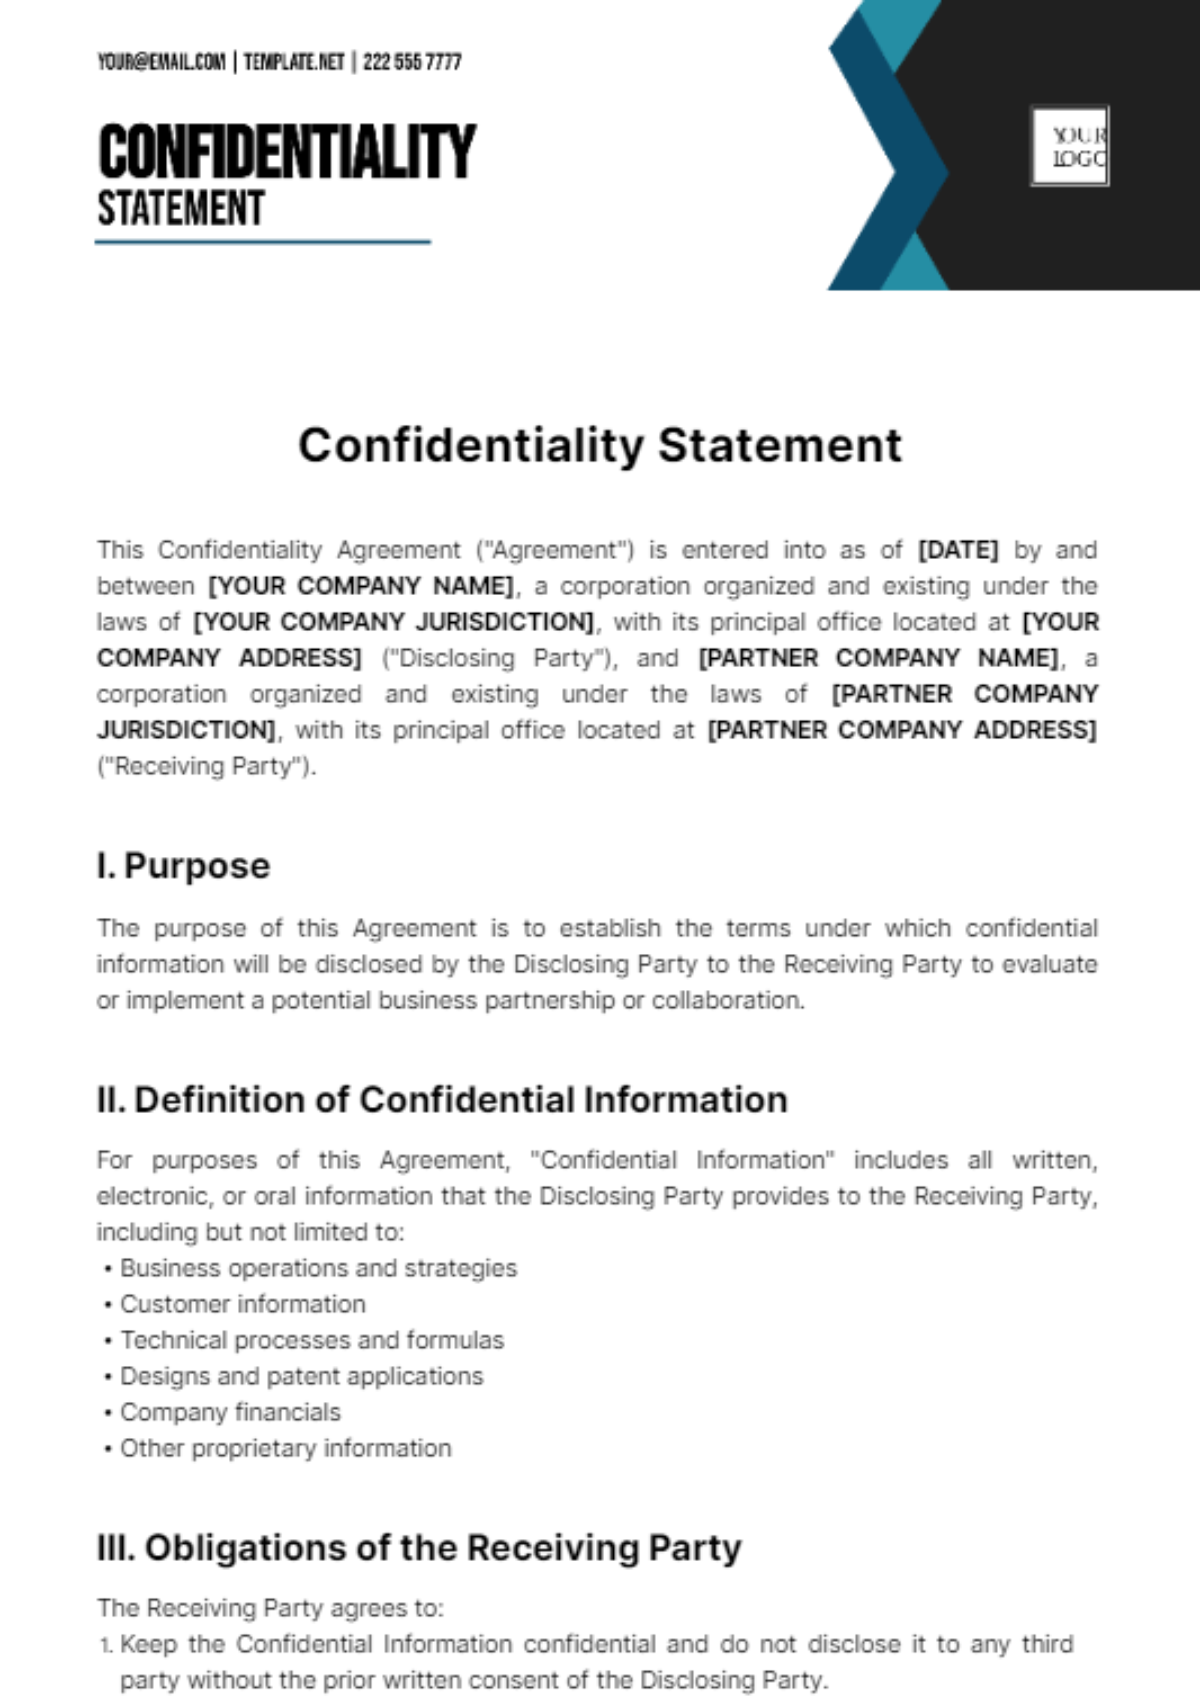 Confidentiality Statement Template